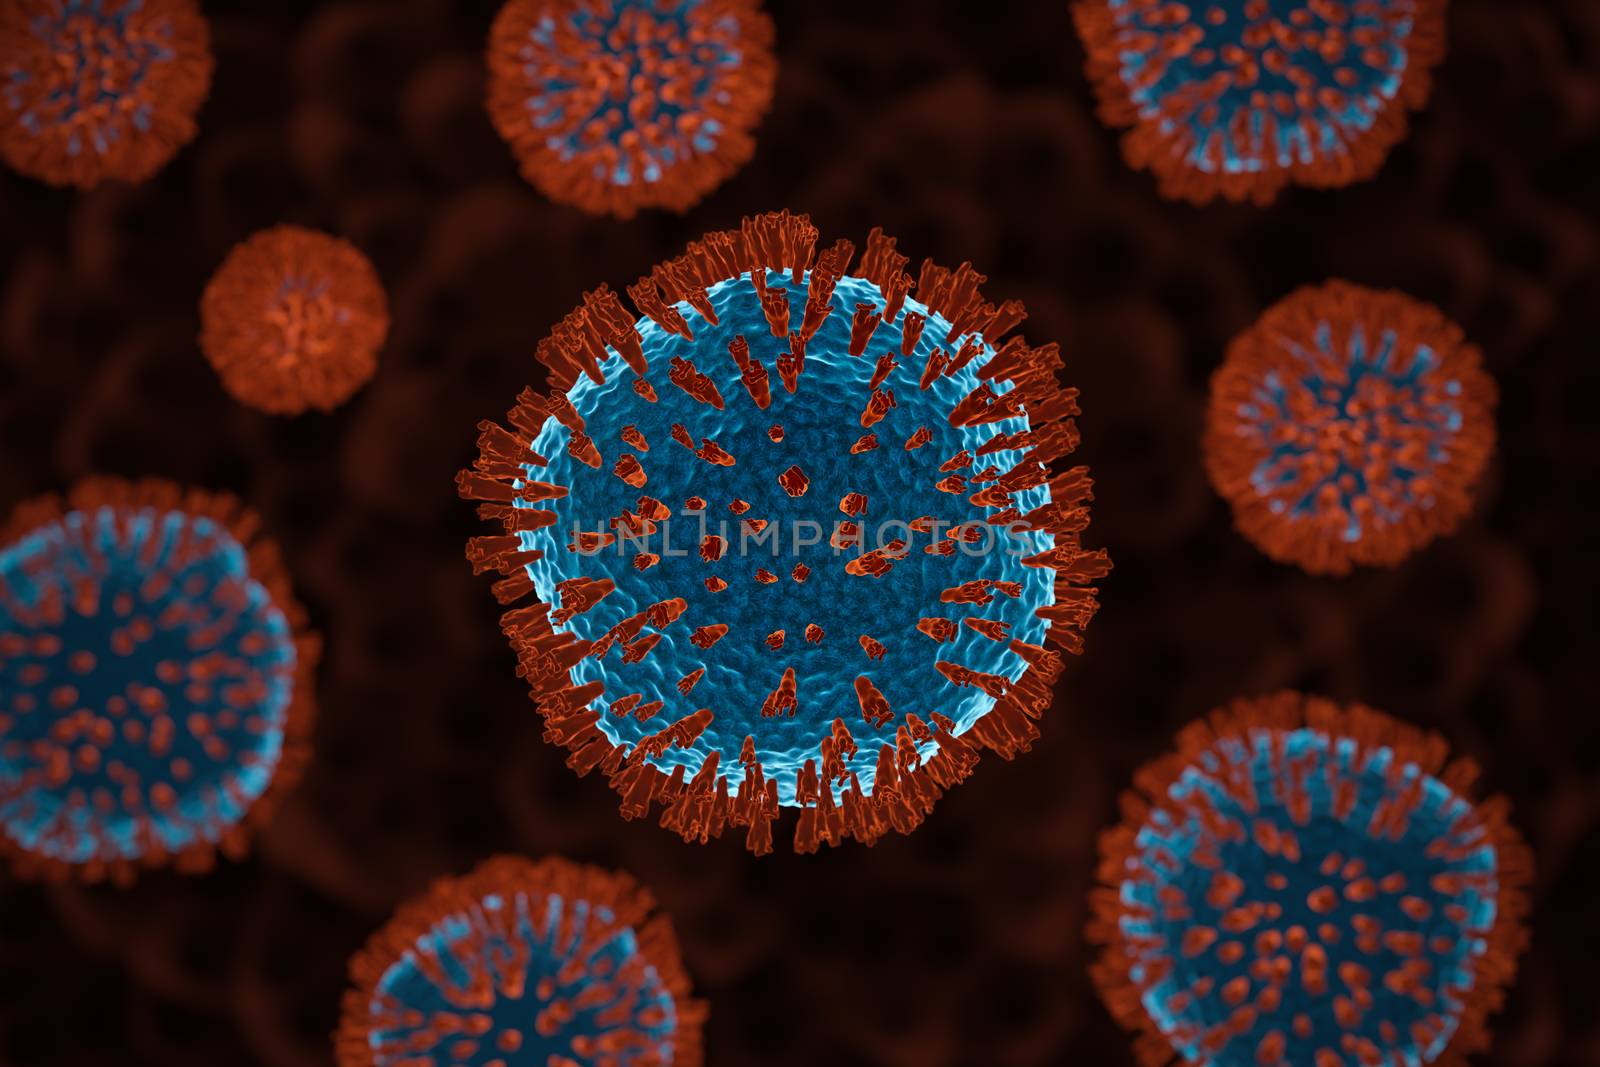 Coronavirus cell inside human body. COVID-19 cell in microscope view. Realistic 3D rendering. Virus simulation model in respiratory infections. Concept of healthy care.